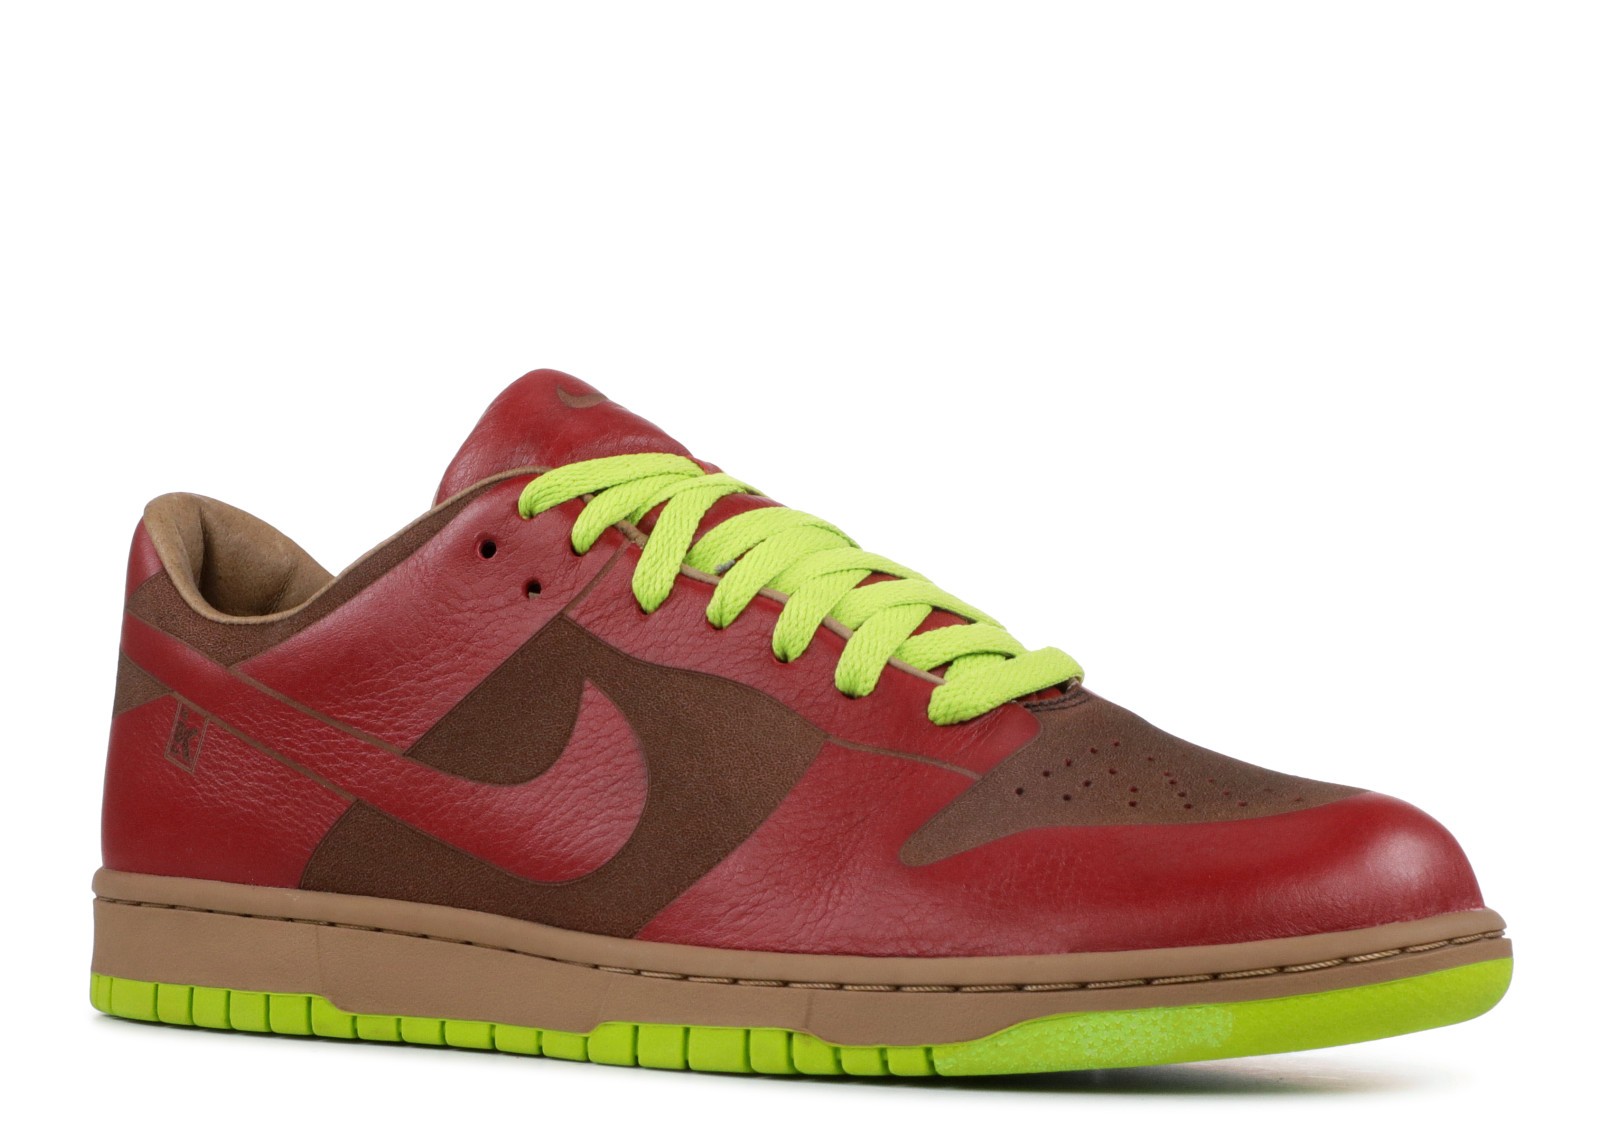 Dunk Low 1 Piece Chartreuse Varsity Red 311611-661 。 - ナイキ